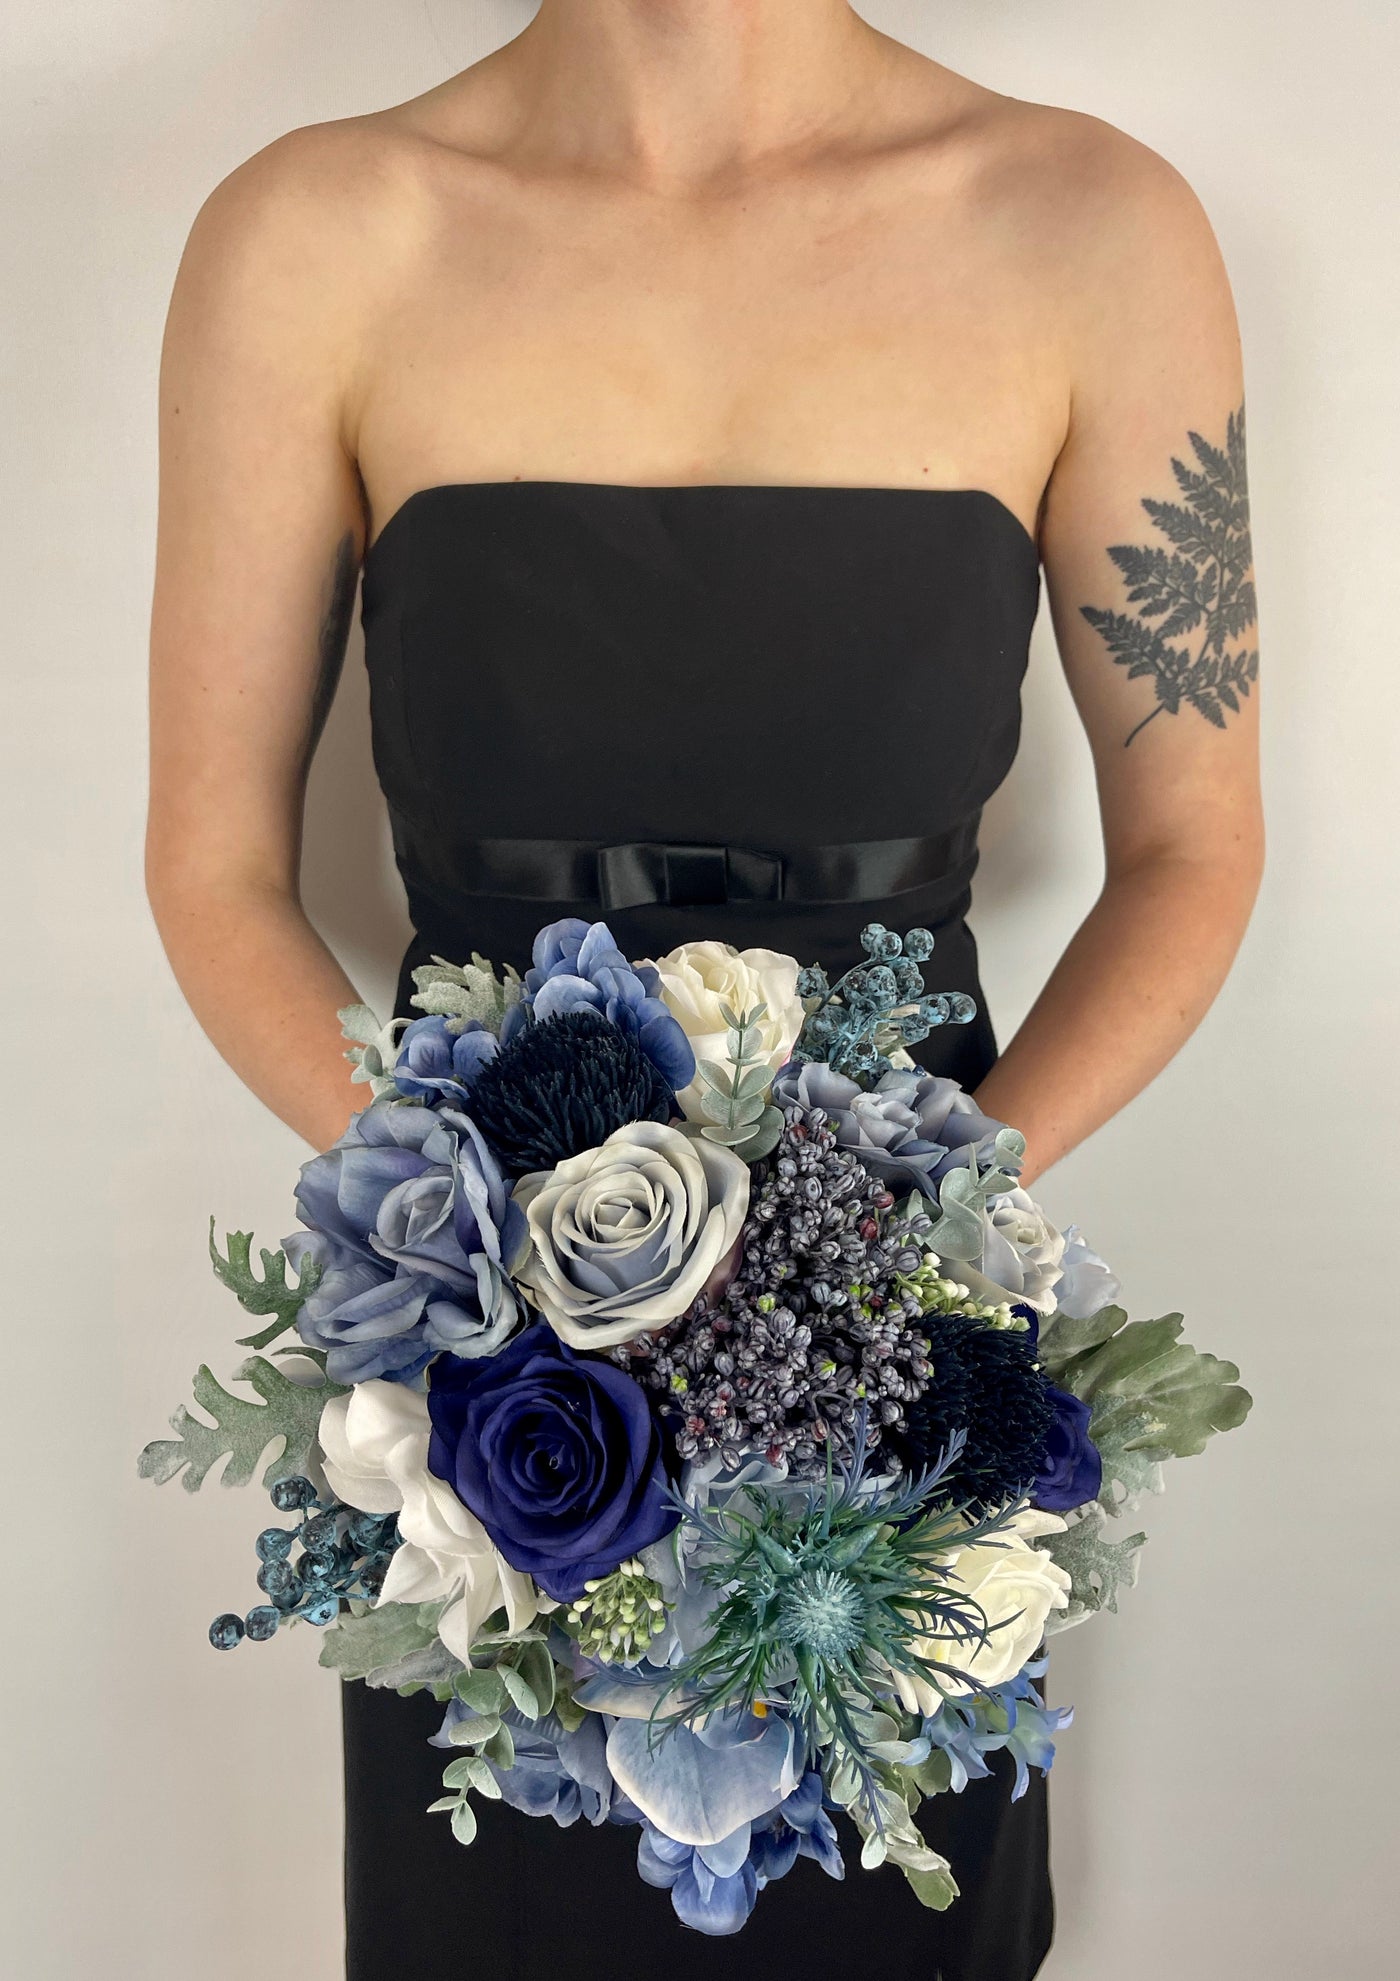 Bridesmaid bouquet made with faux blue flowers. This bouquet  features himalayan blue poppies, delphiniums, hyacinth, and peonies together. To add texture and interest we added elderberries, oxford blue thistle and eucalyptus springs. five day rental for $69.00